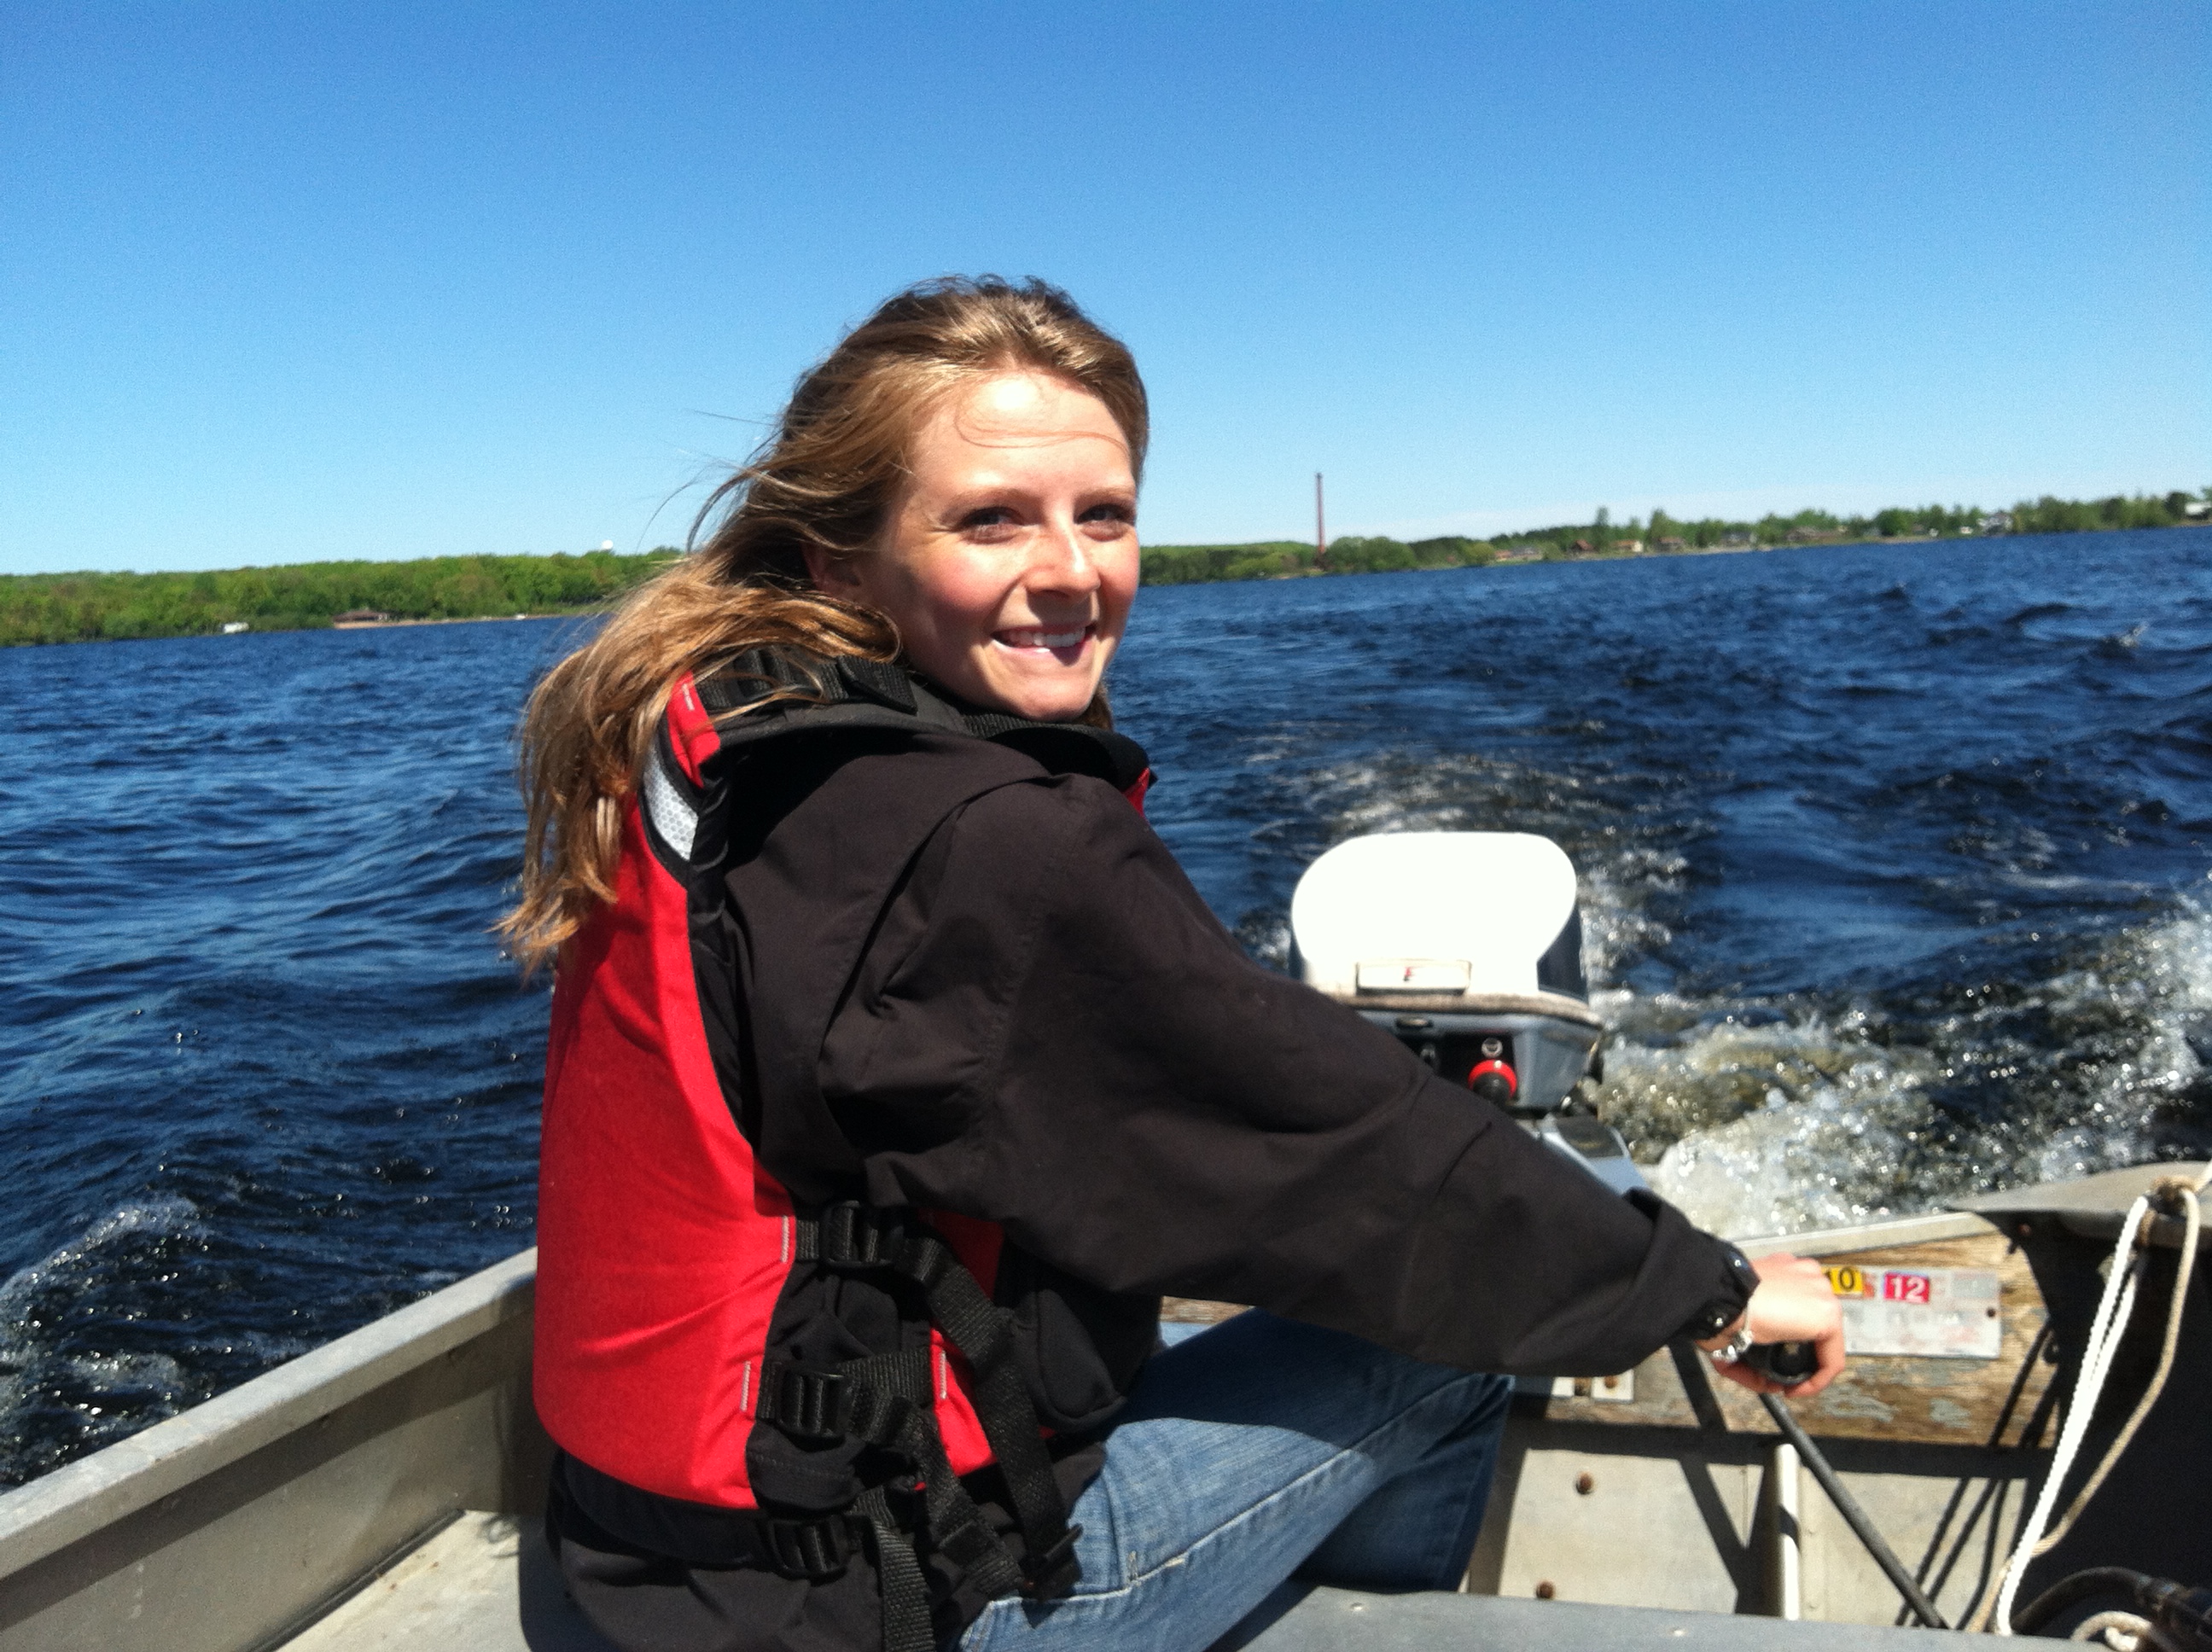 Volunteer leader Xavier Donajkowski steering the boat out onto Lake Independence to collect water quality information in 2014.